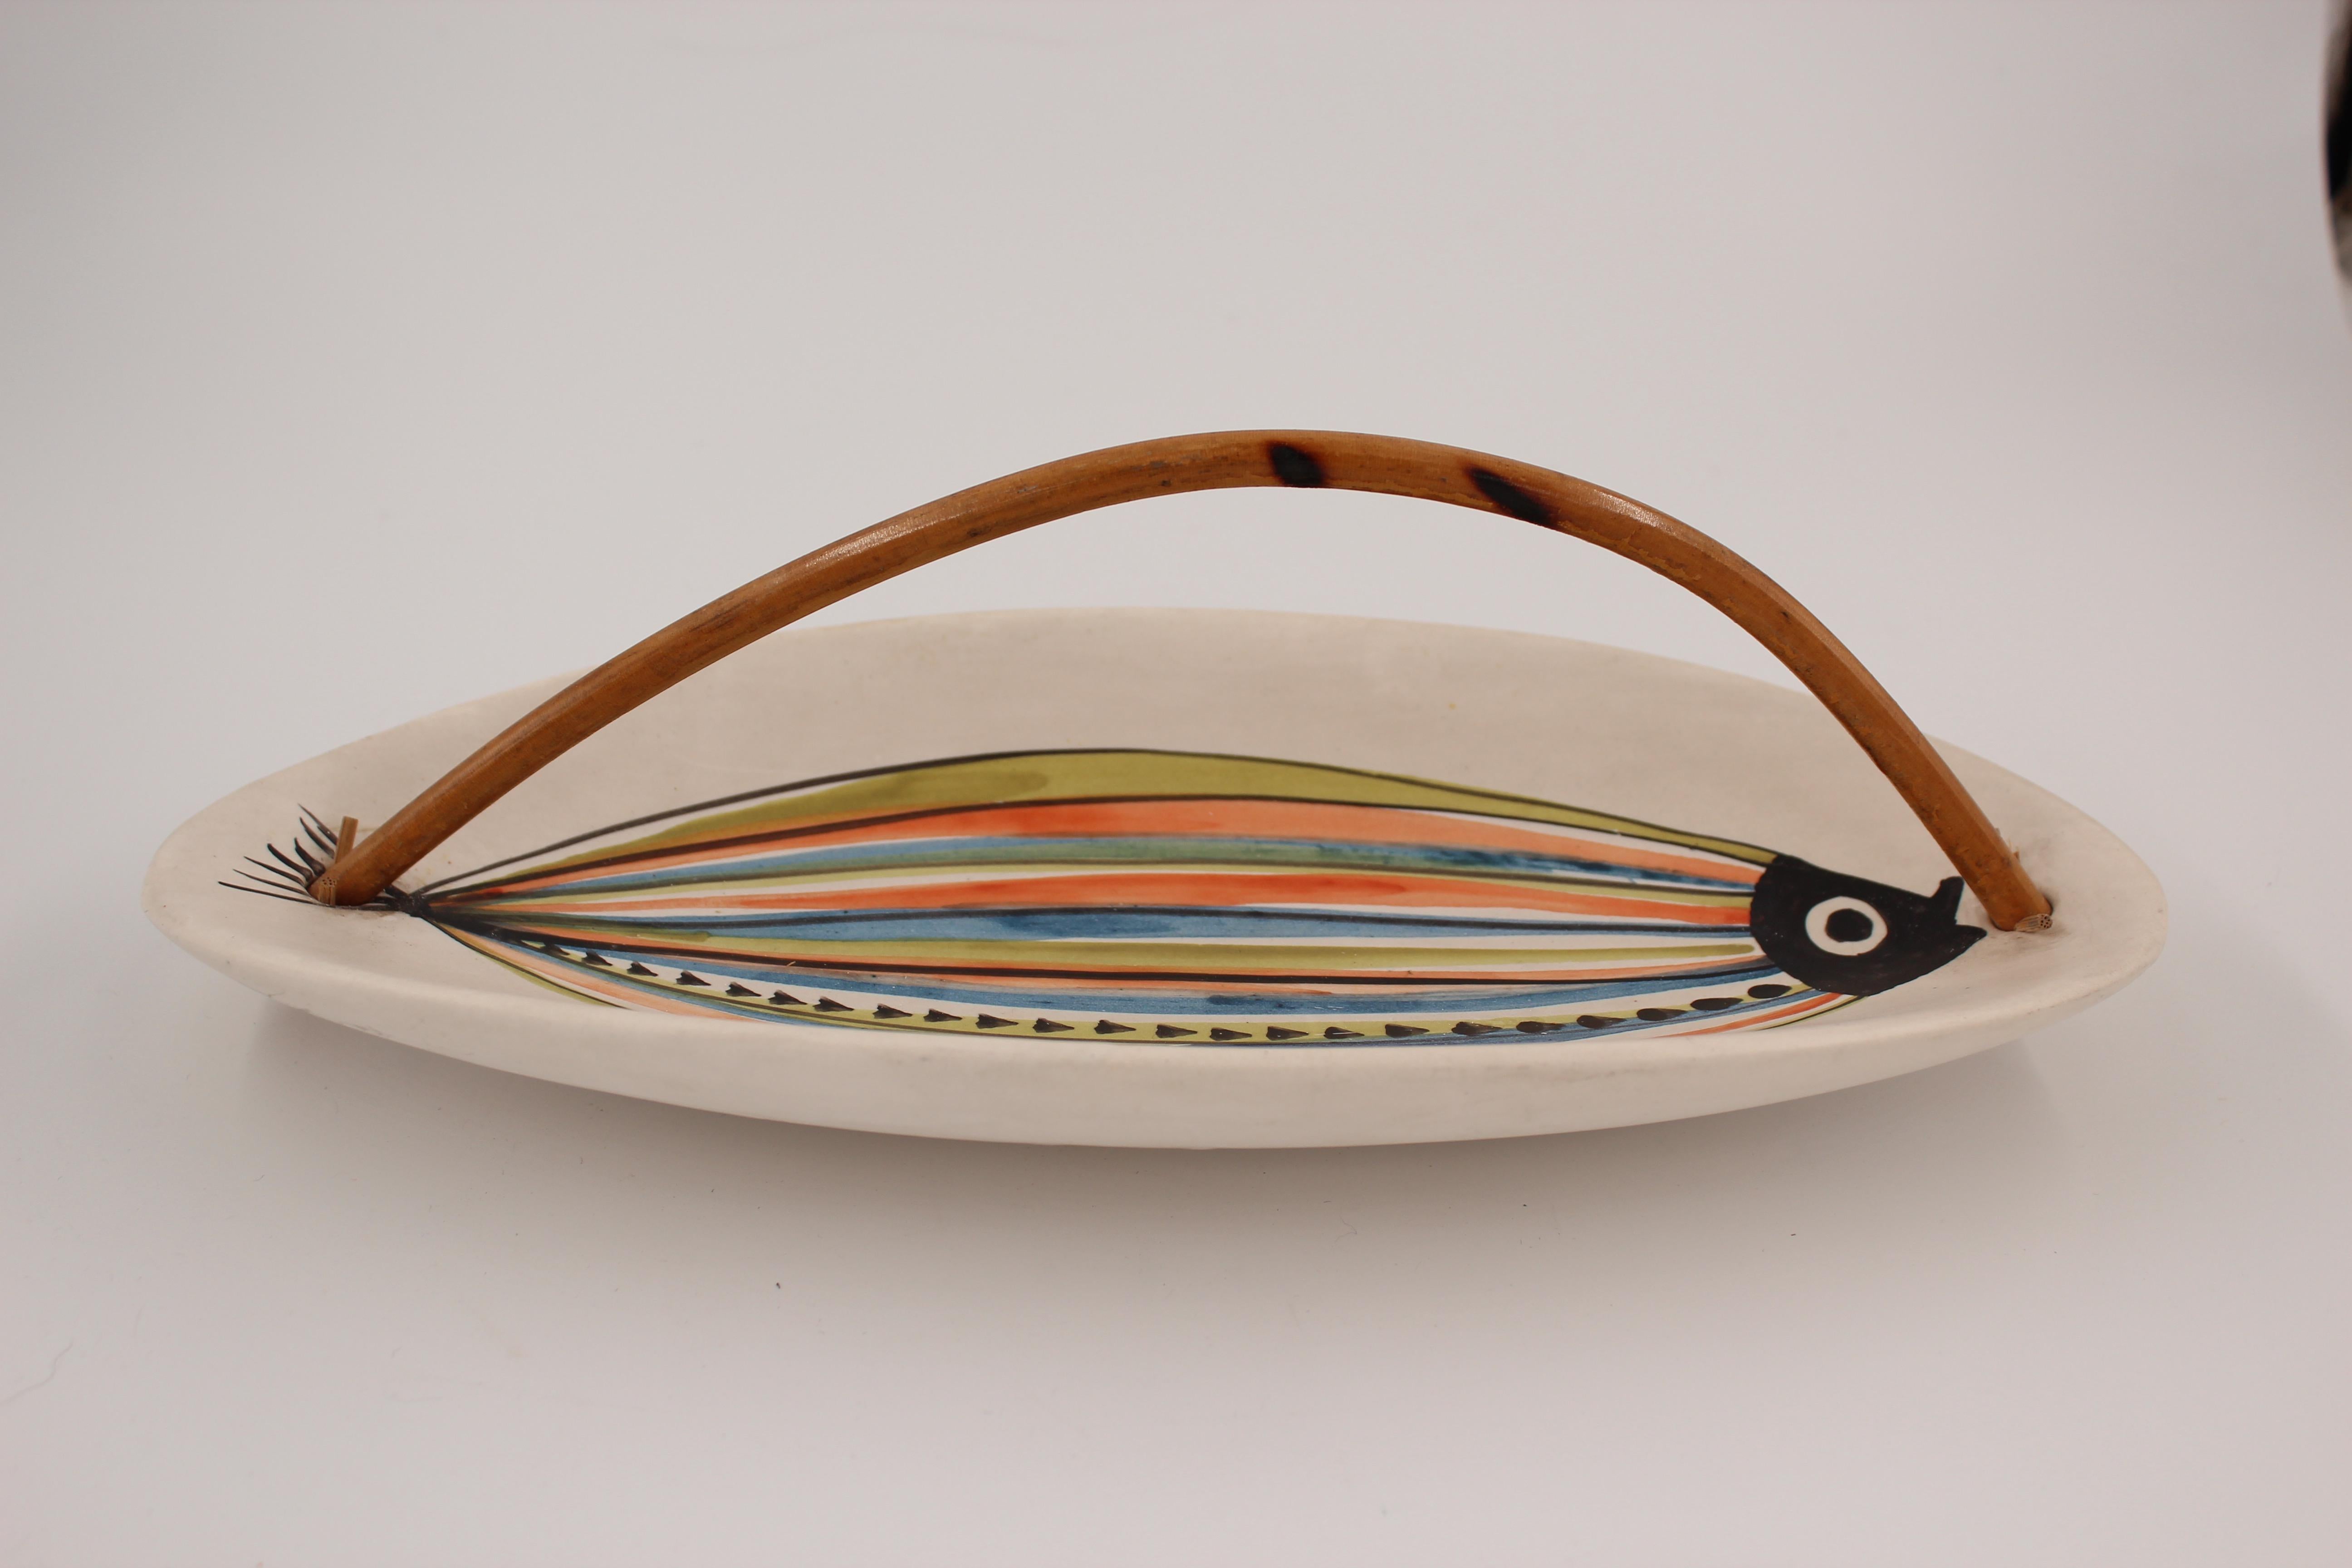 Roger Capron (1922-2006) decorative dish with bamboo handle
Blue/orange/green stylized fish
Signed Capron, Vallauris, 1950s.